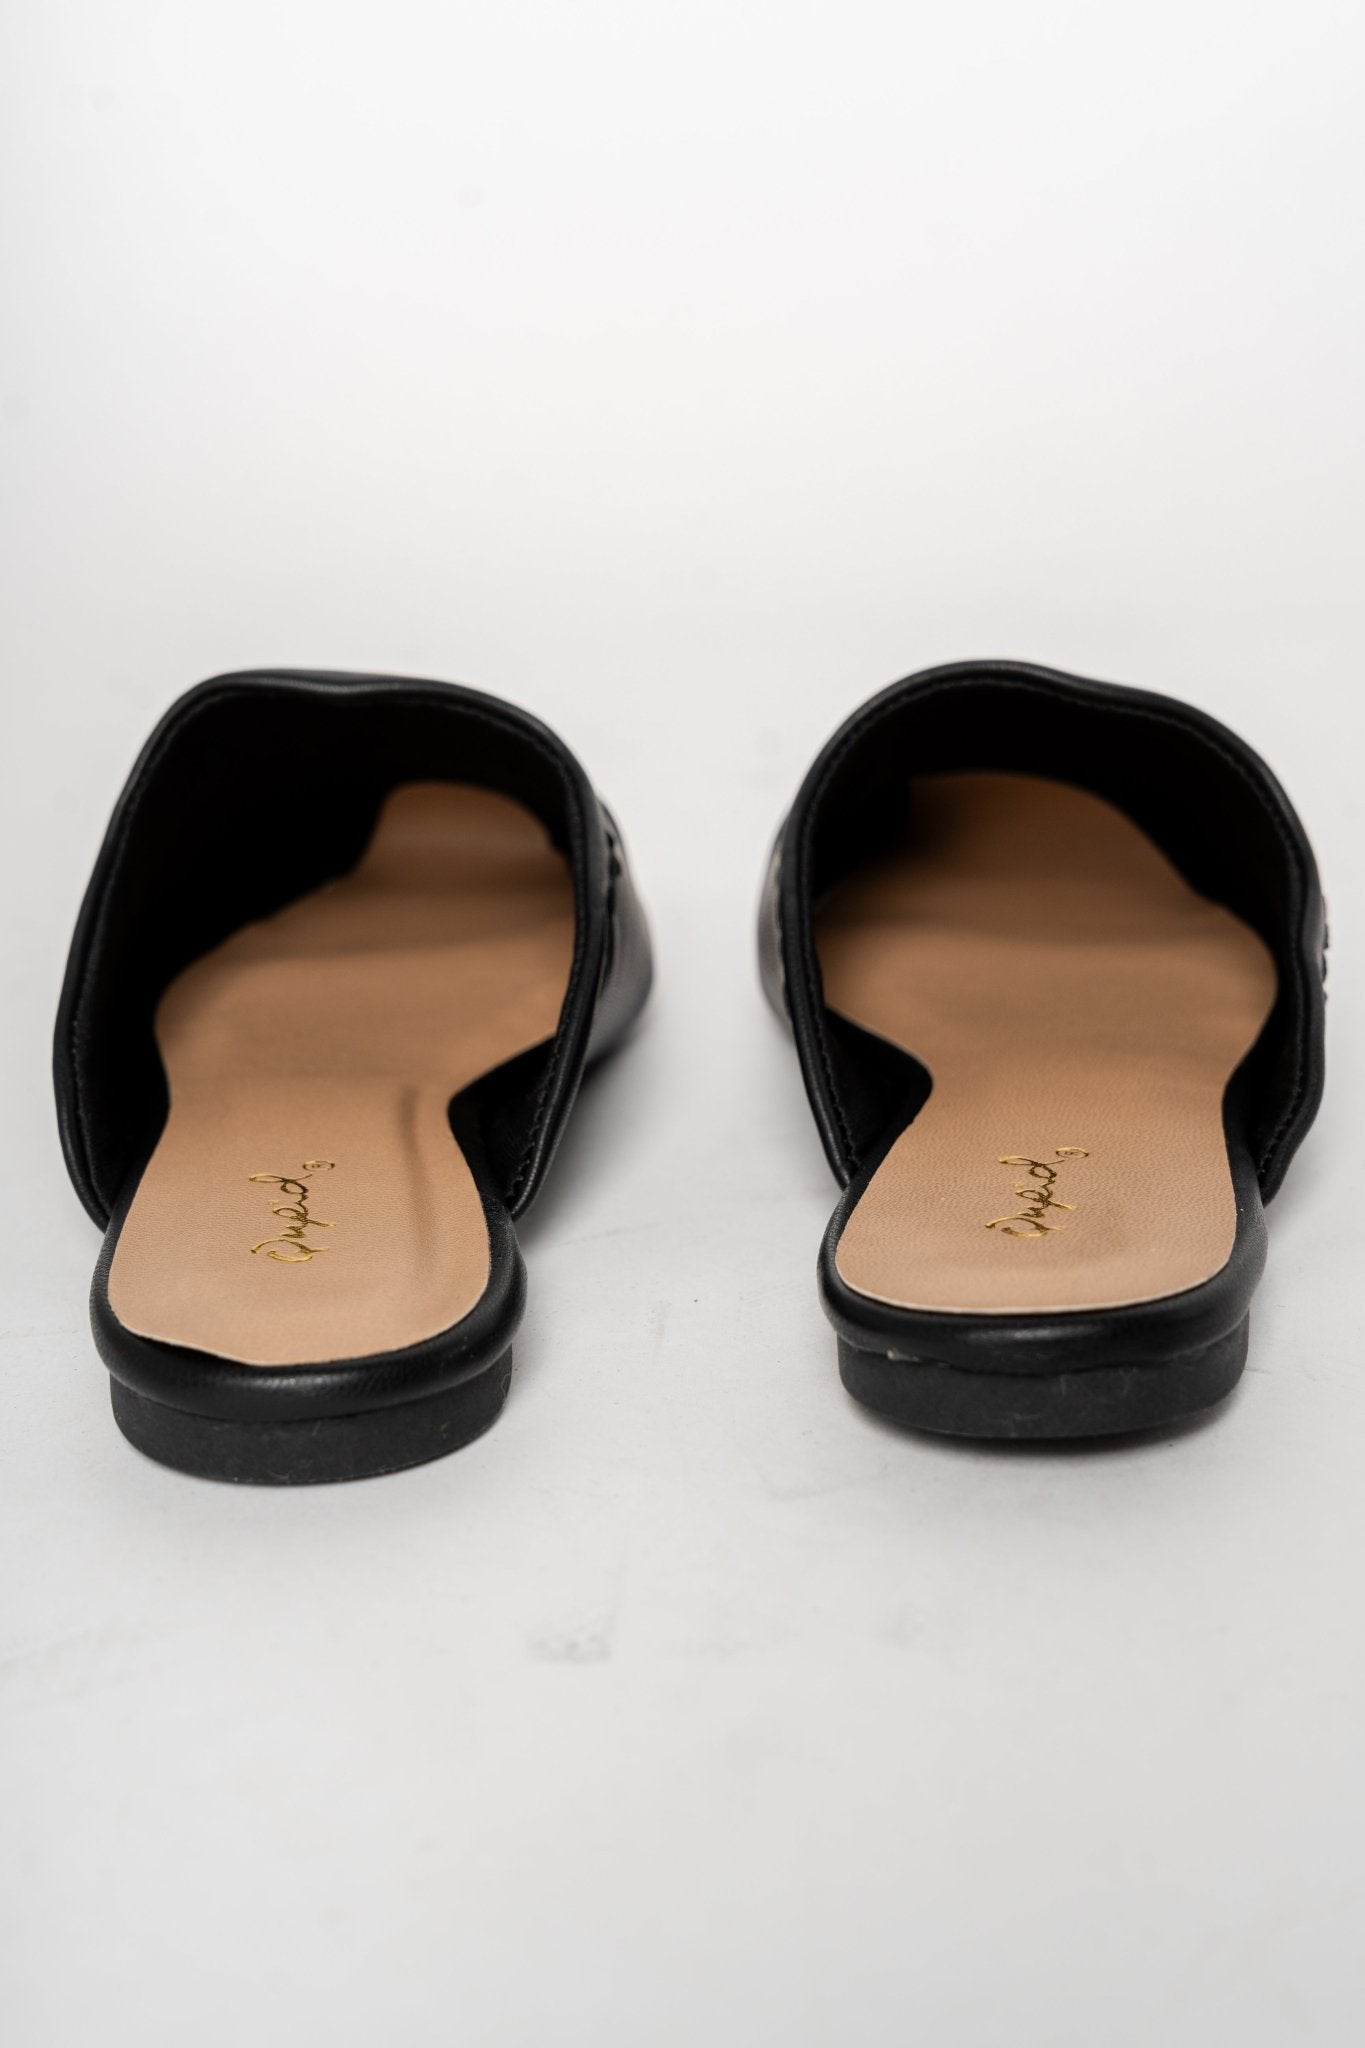 Swirl mule ballerina flat black - Affordable shoes - Boutique Shoes at Lush Fashion Lounge Boutique in Oklahoma City